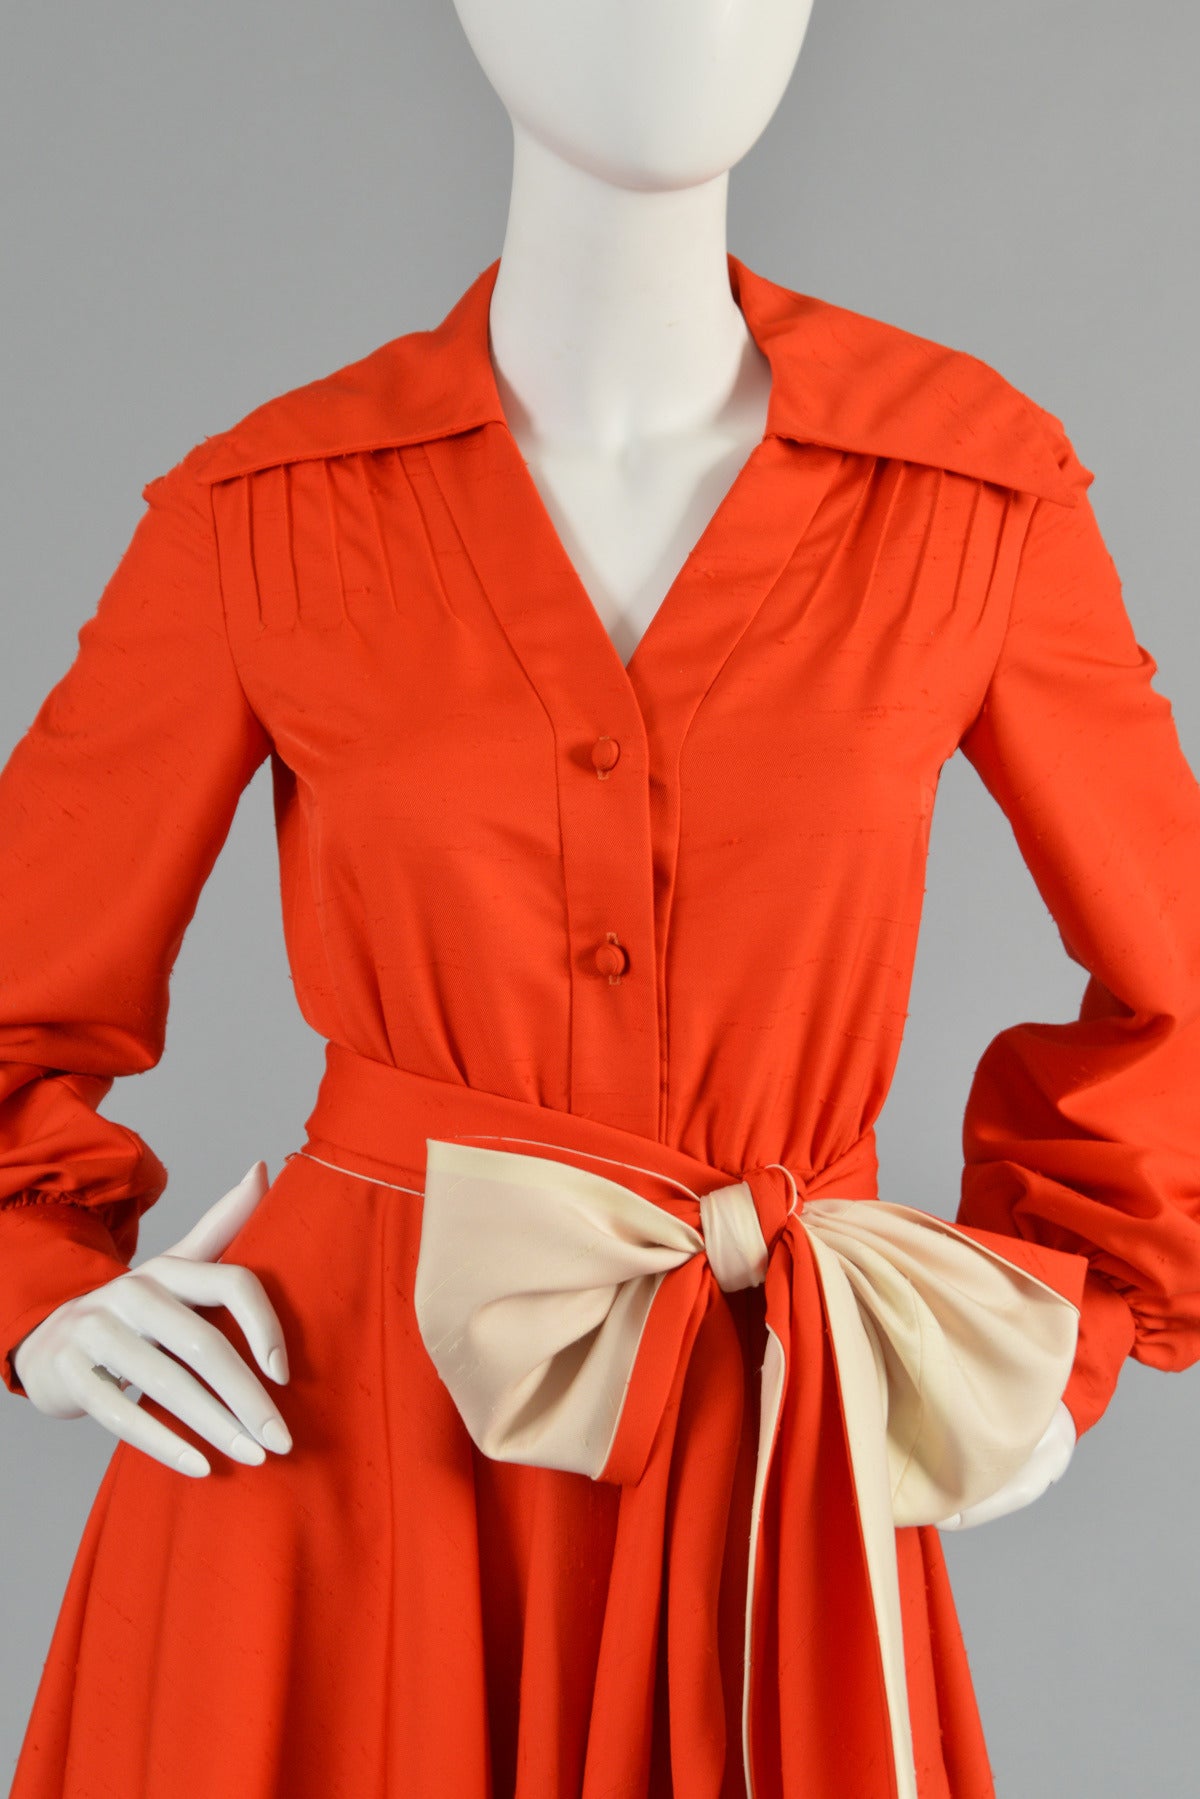 1970's Geoffrey Beene Silk Dress with Contrasting Sash In Excellent Condition For Sale In Yucca Valley, CA